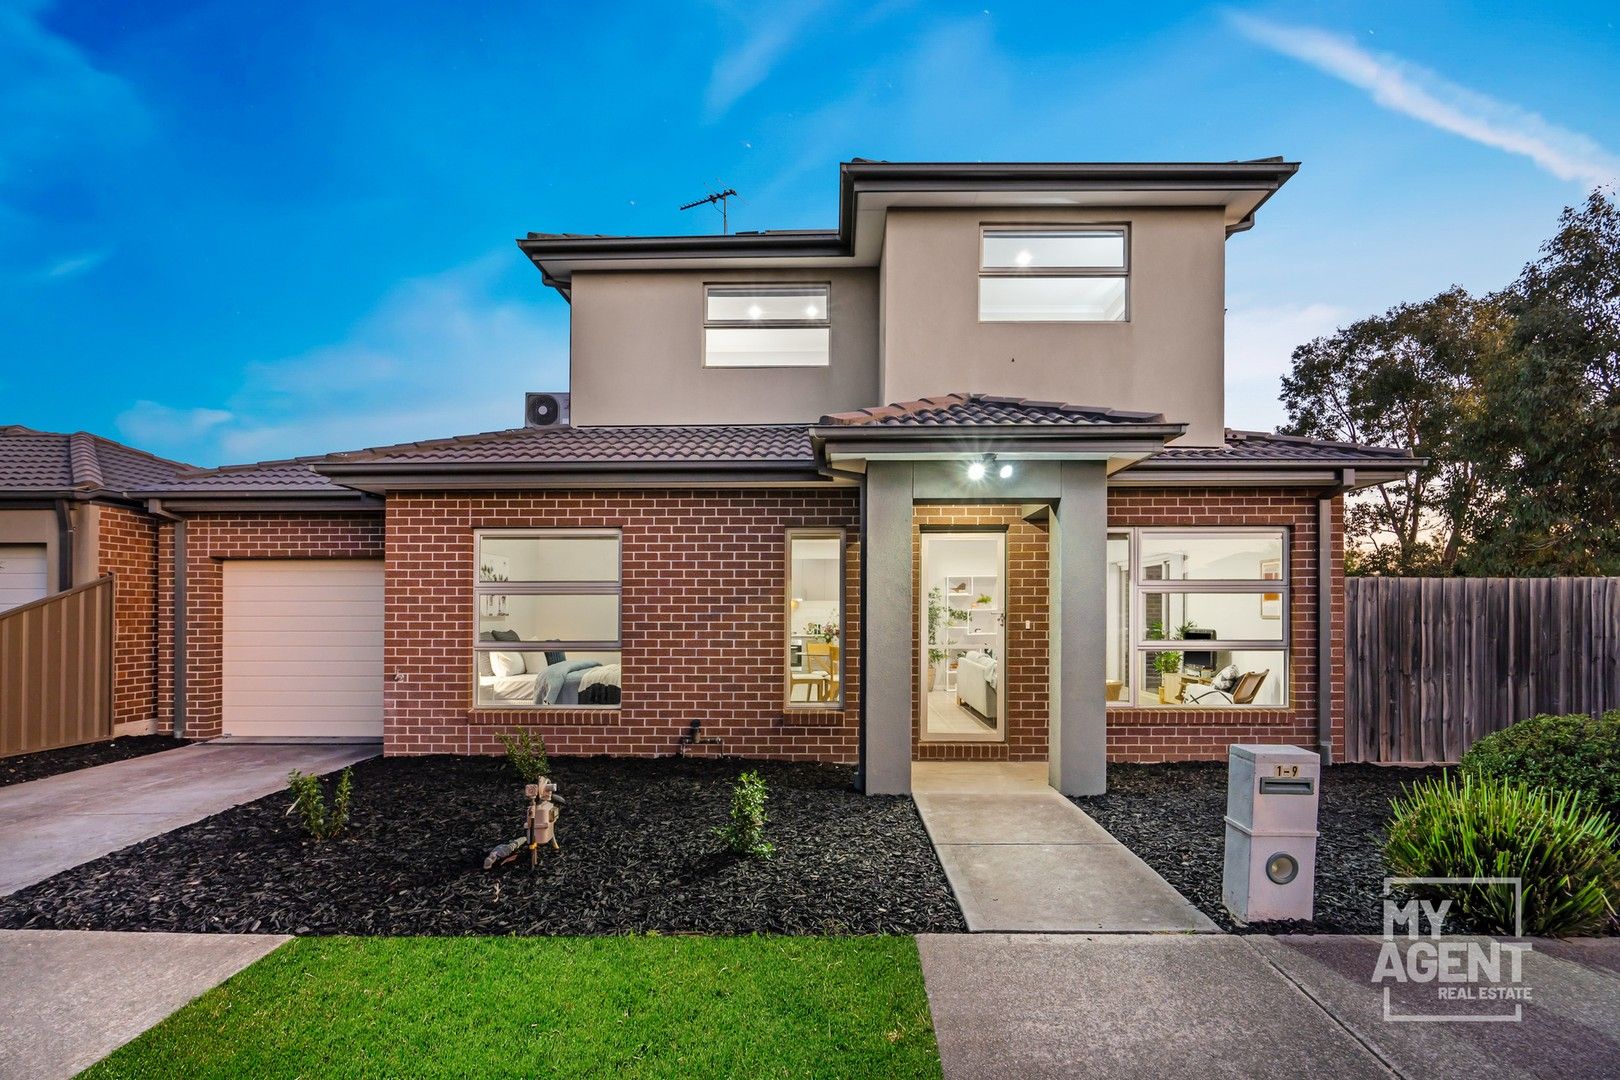 3 bedrooms Townhouse in 9 Gully Way CRAIGIEBURN VIC, 3064